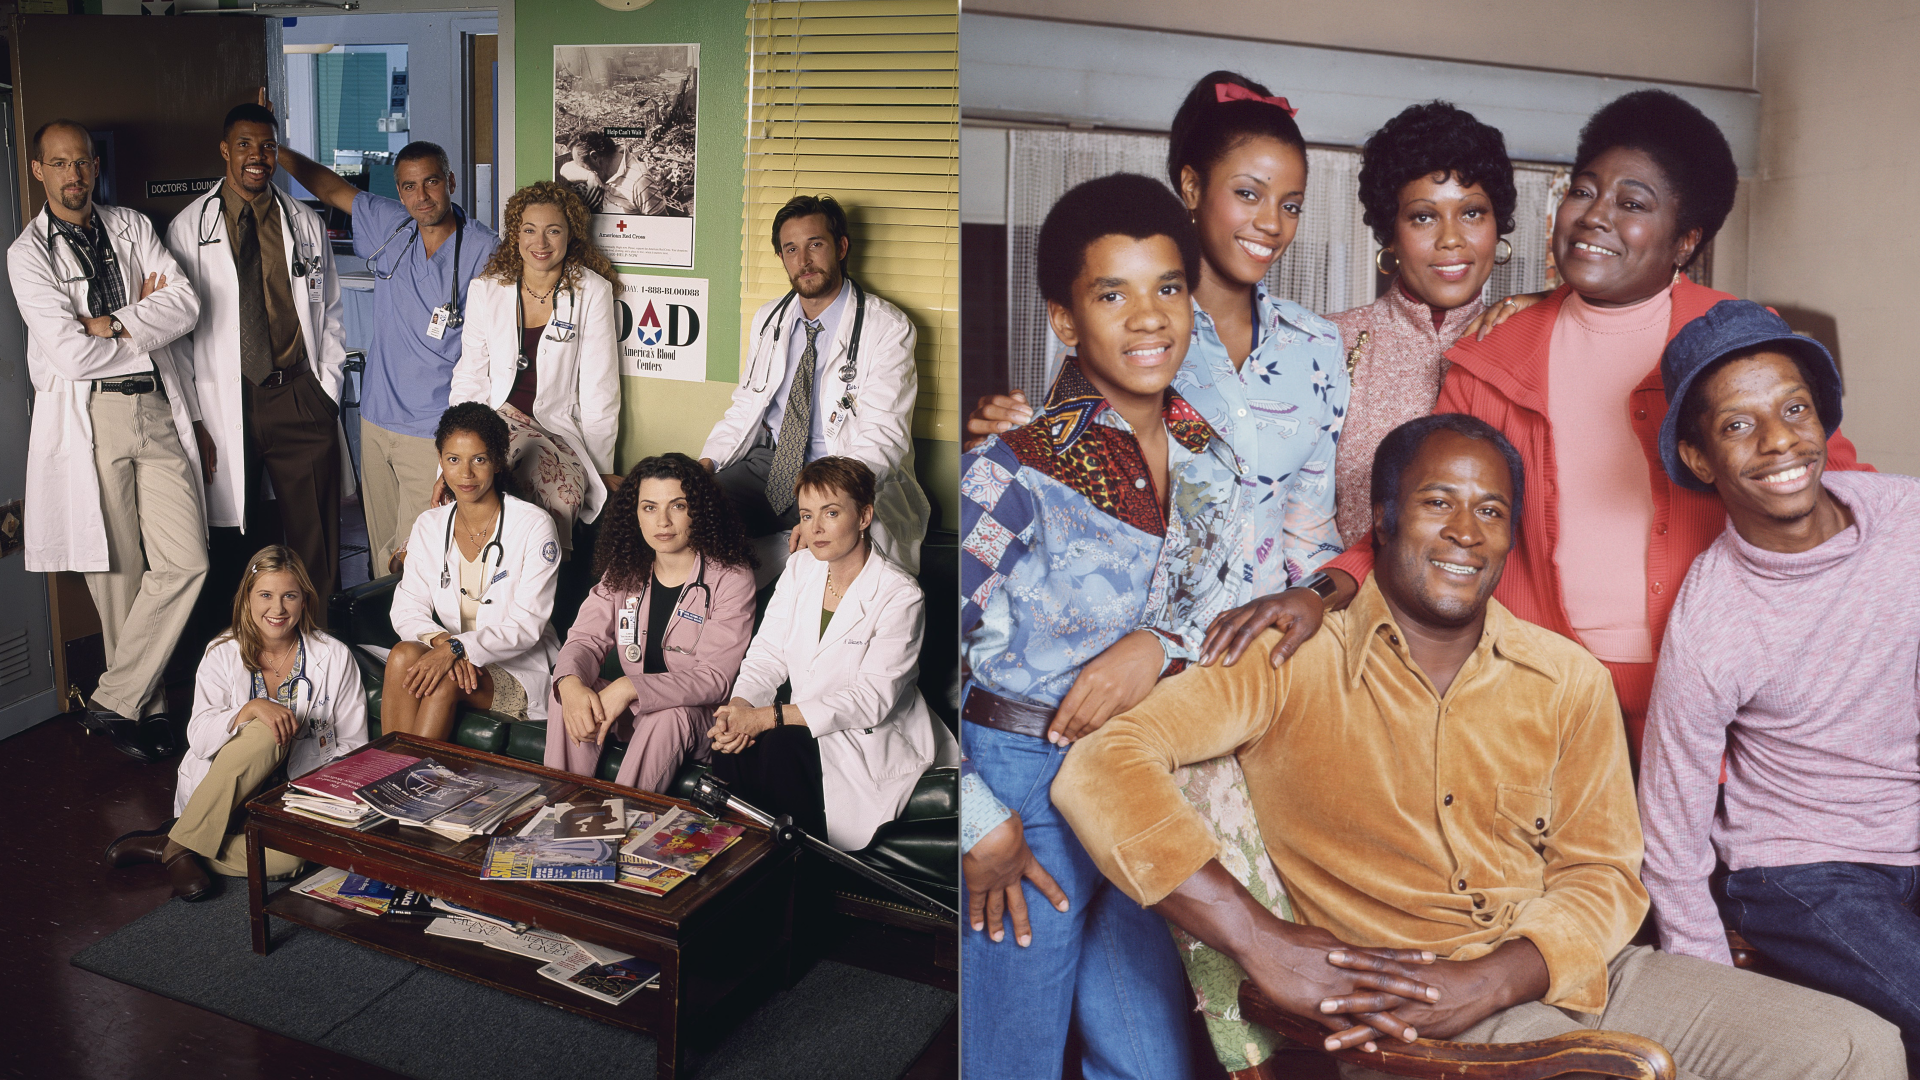 Side by side photos of the casts of two television shows 